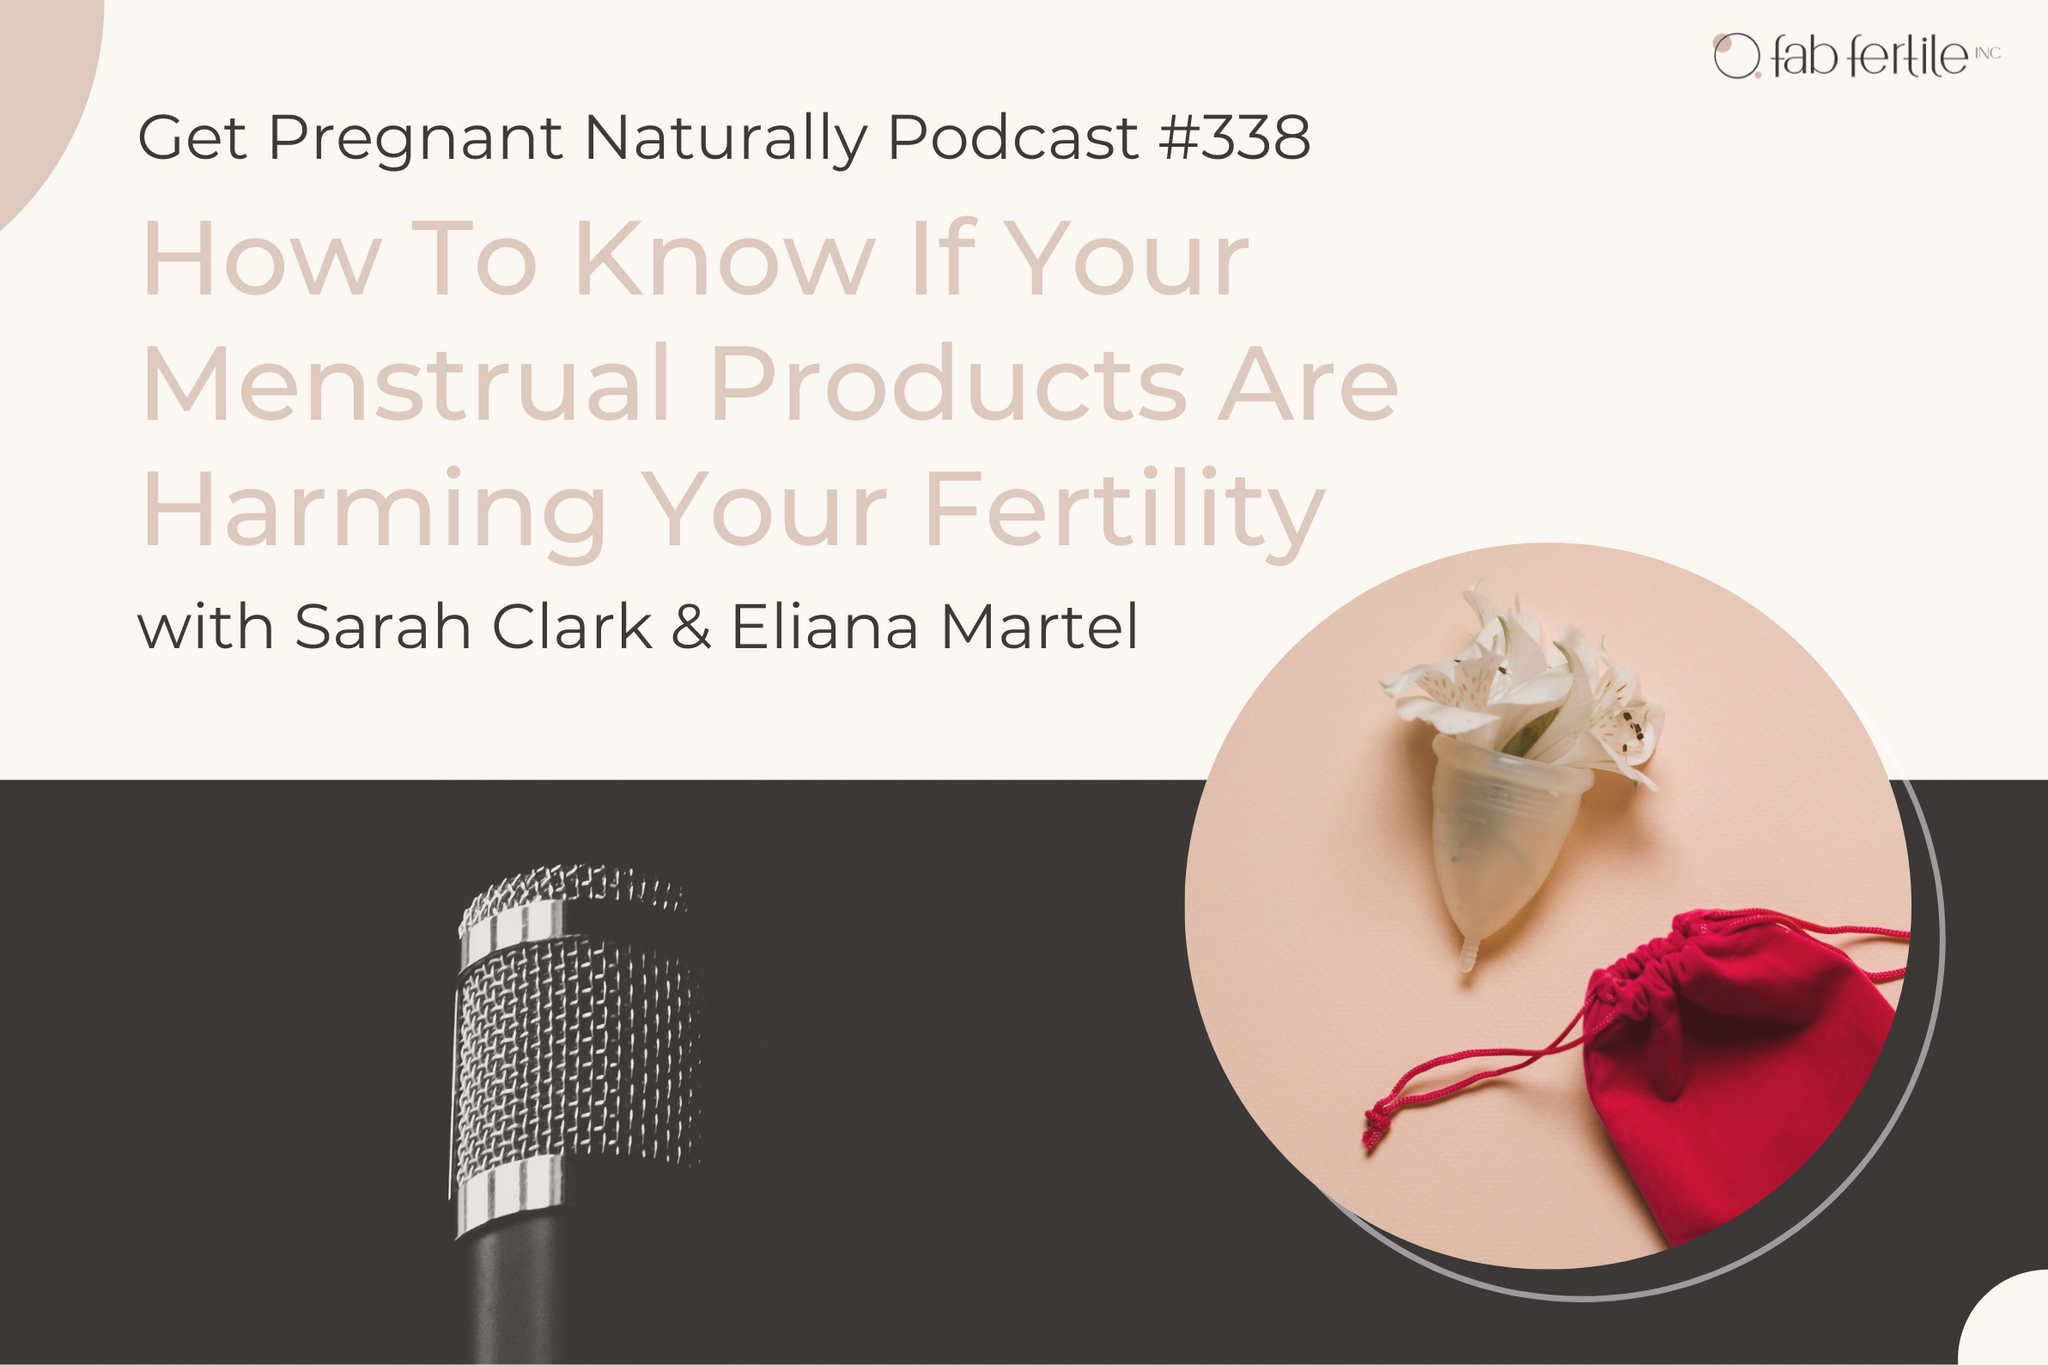 How To Know If Your Menstrual Products Are Harming Your Fertility